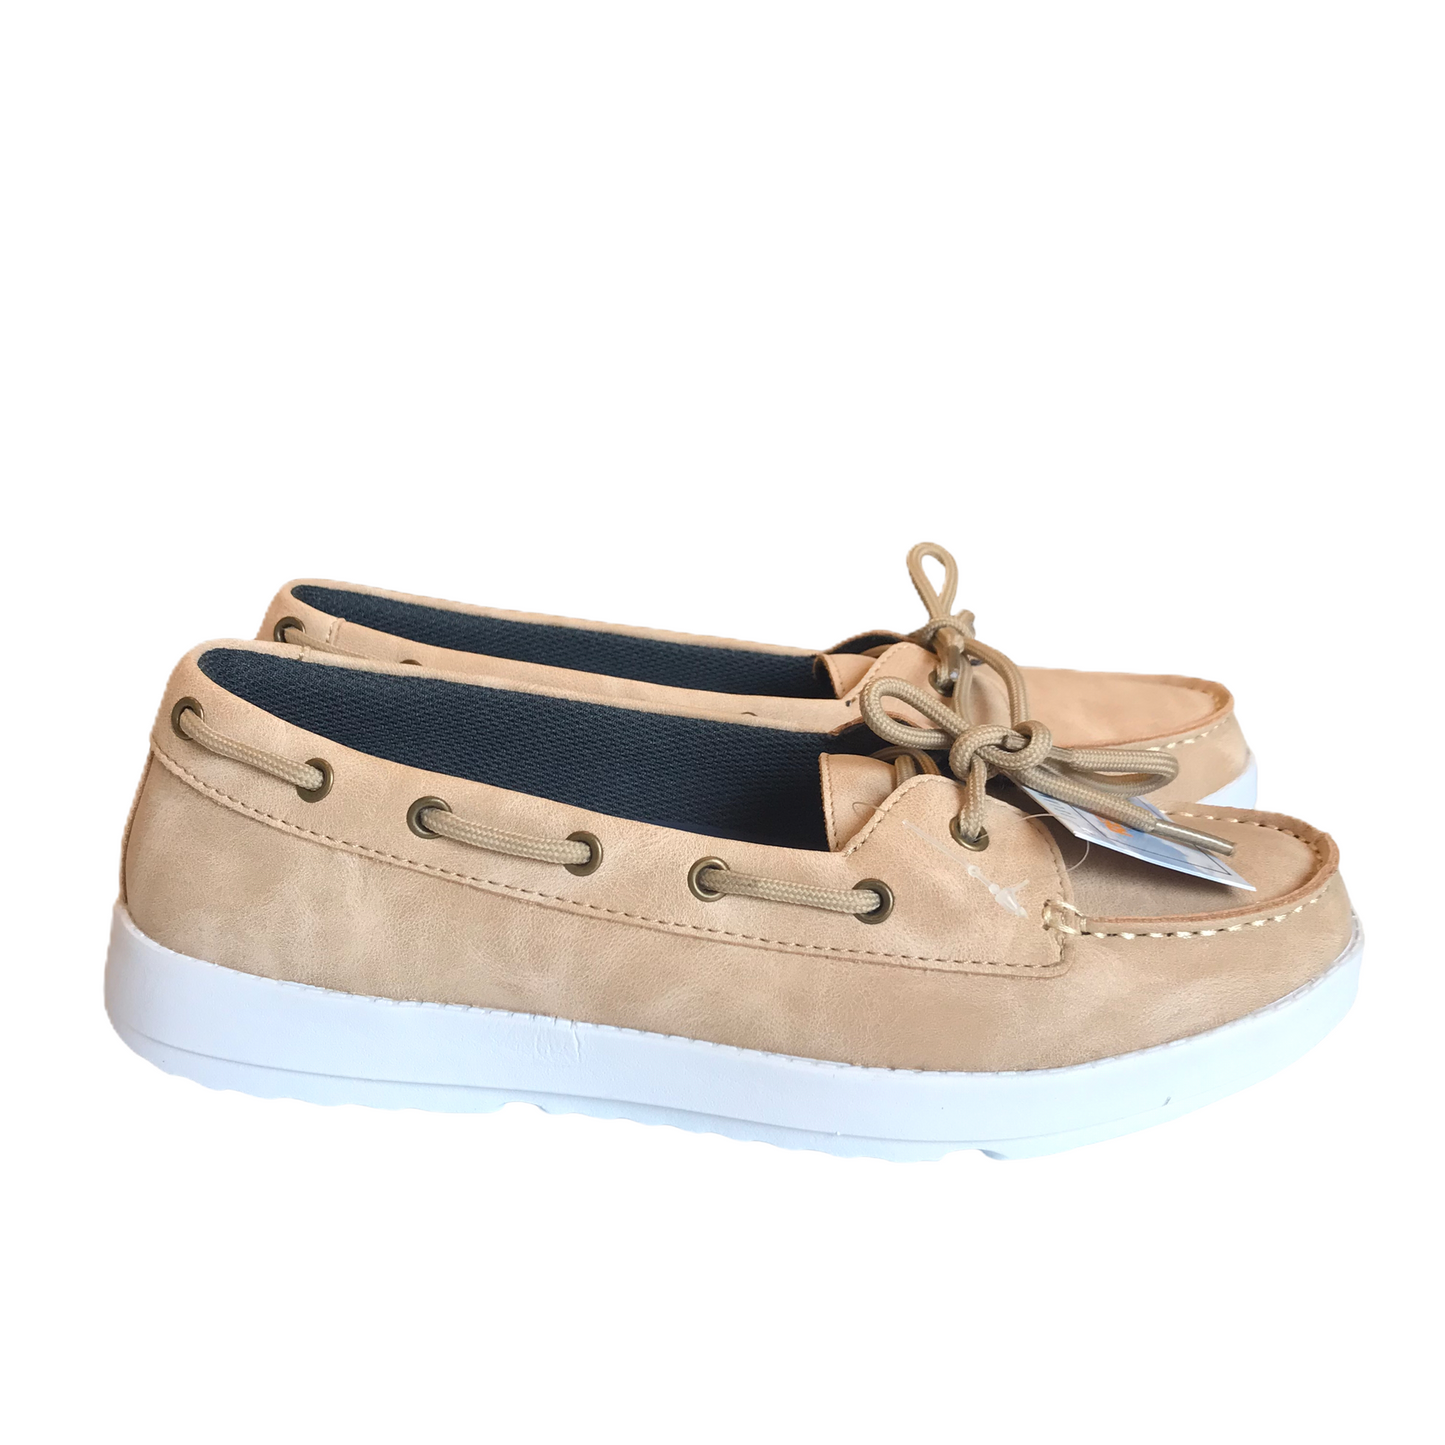 Tan Shoes Flats By Island Surf, Size: 9.5